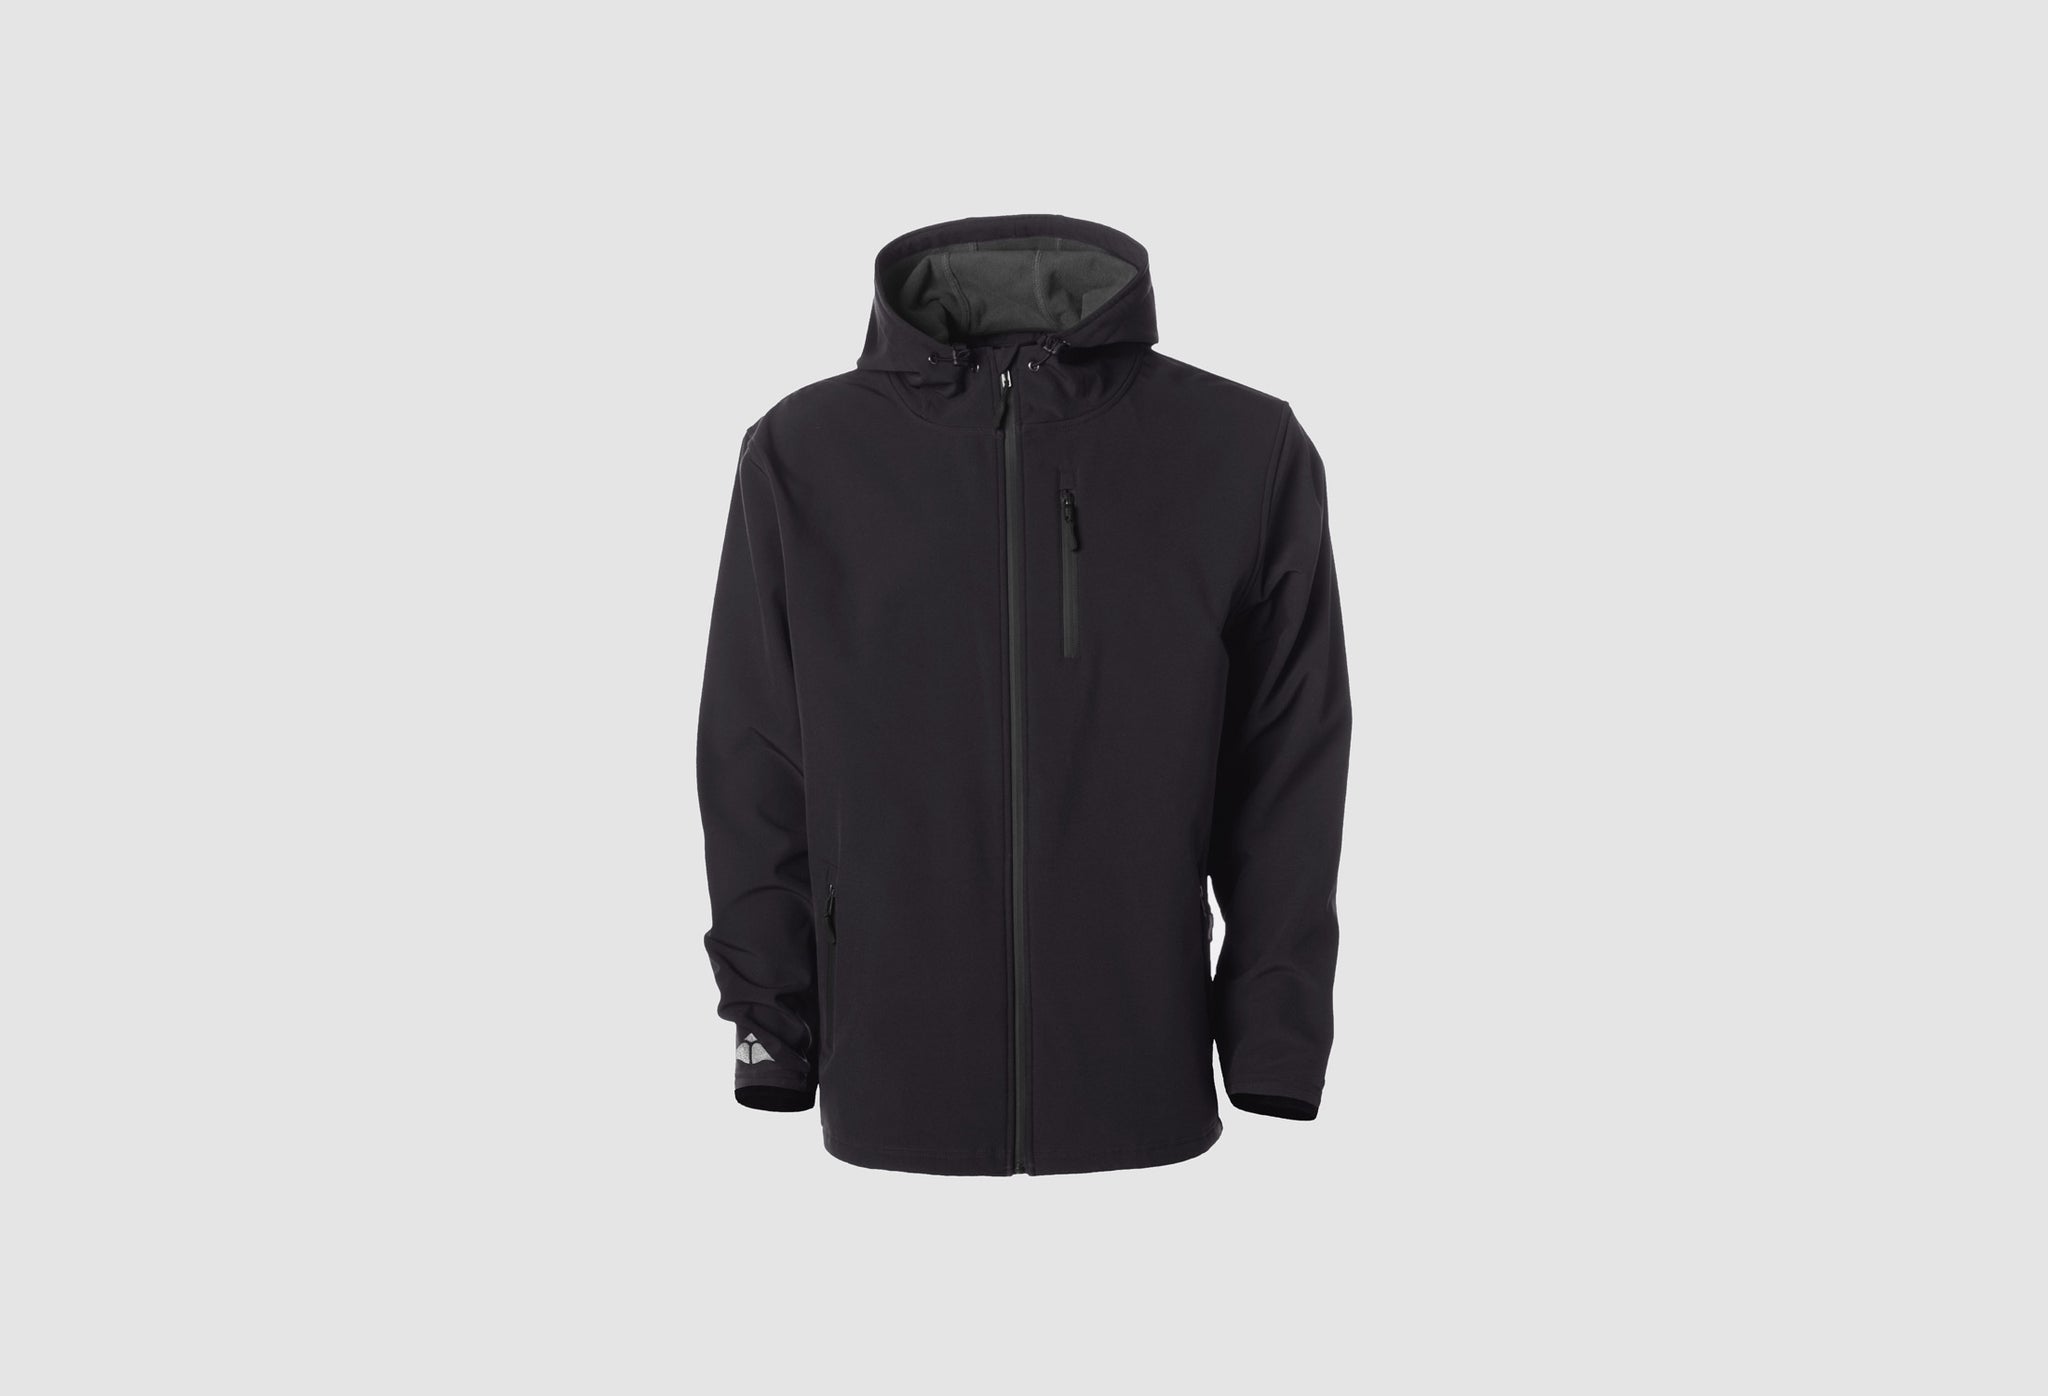 Fire Kai Weather Resistant Cousteau Jacket in Black